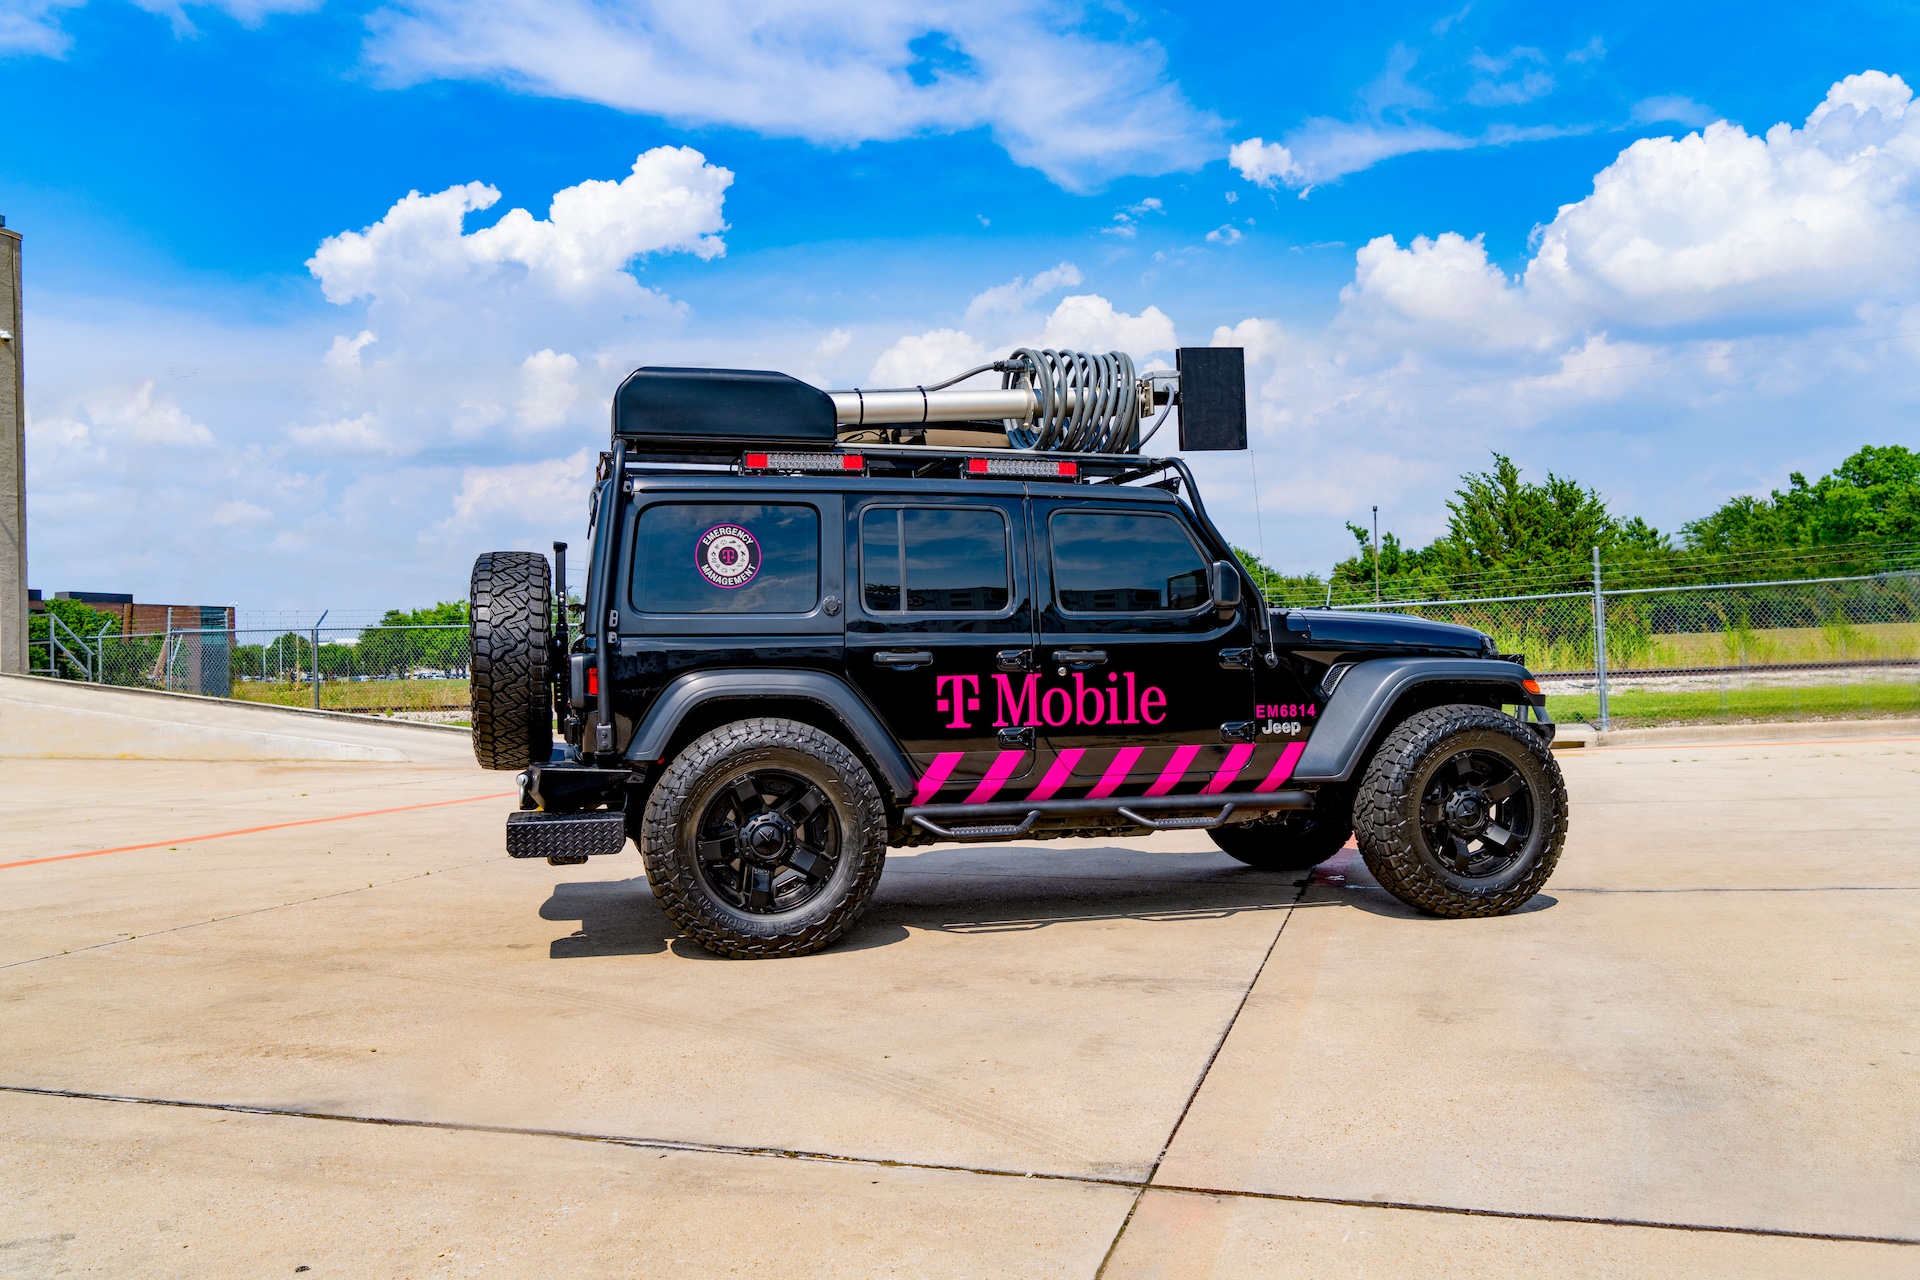 T-Mobile logo branded all-terrain vehicle with mounted satellite equipment retracted to convey portability. Vehicle is parked outdoors.